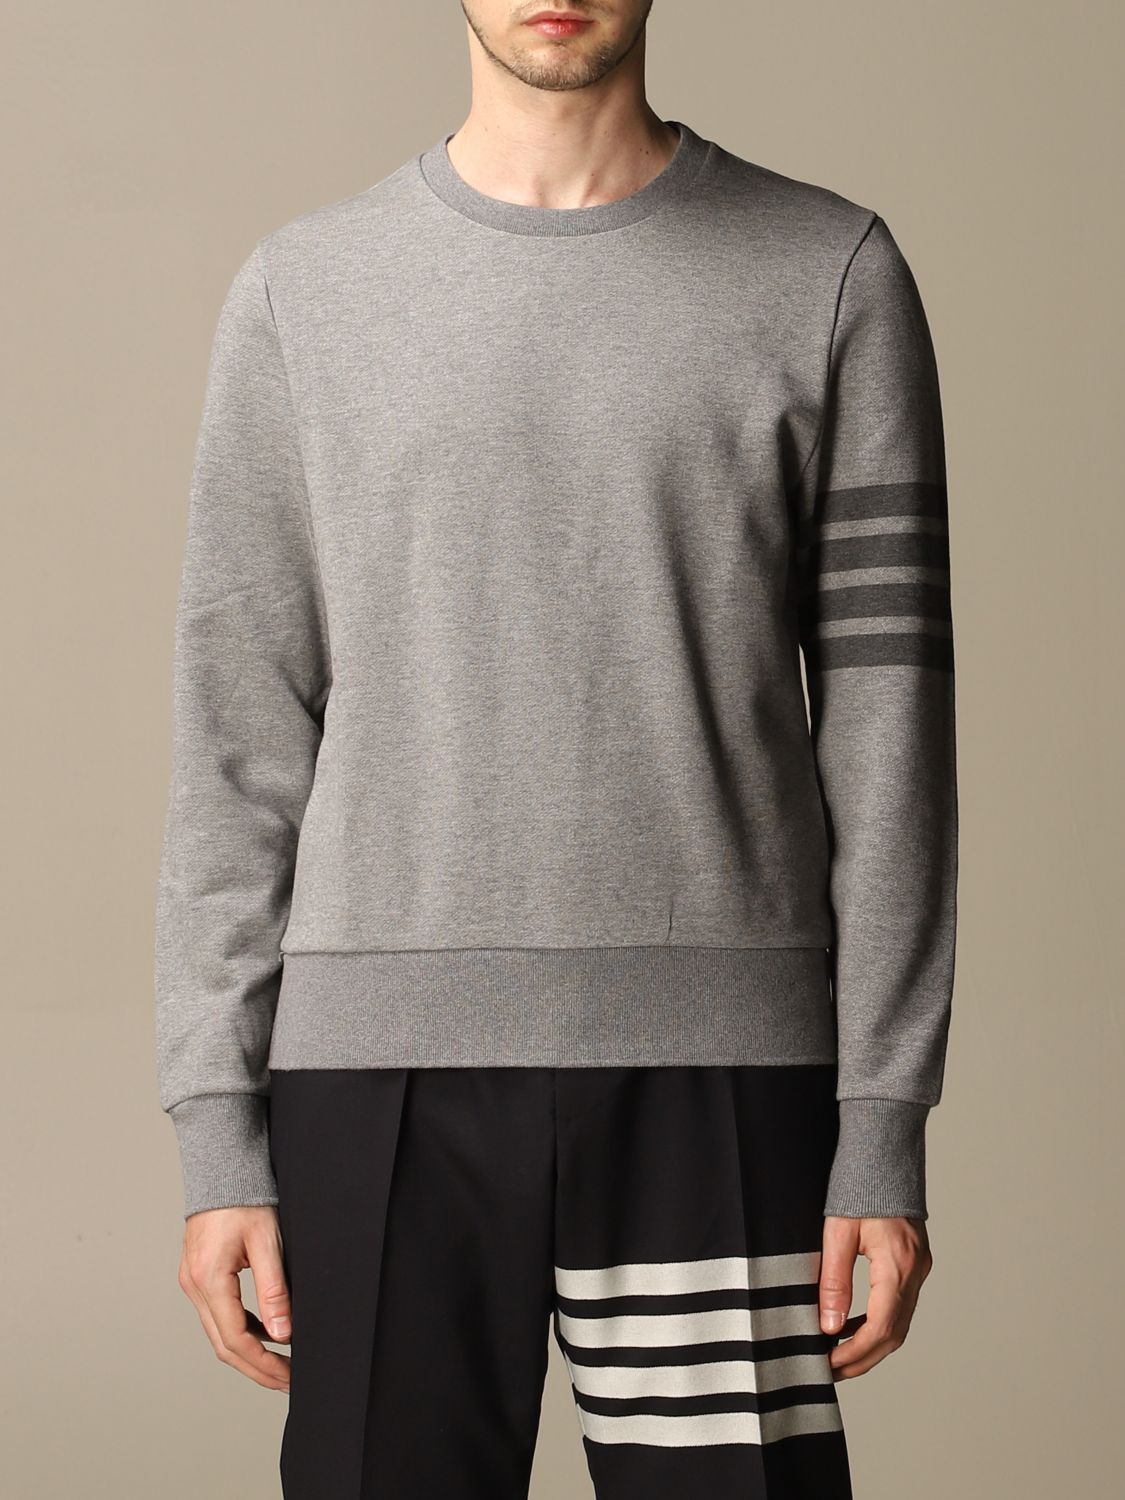 THOM BROWNE: cotton sweater with bands - Grey | Thom Browne sweatshirt ...